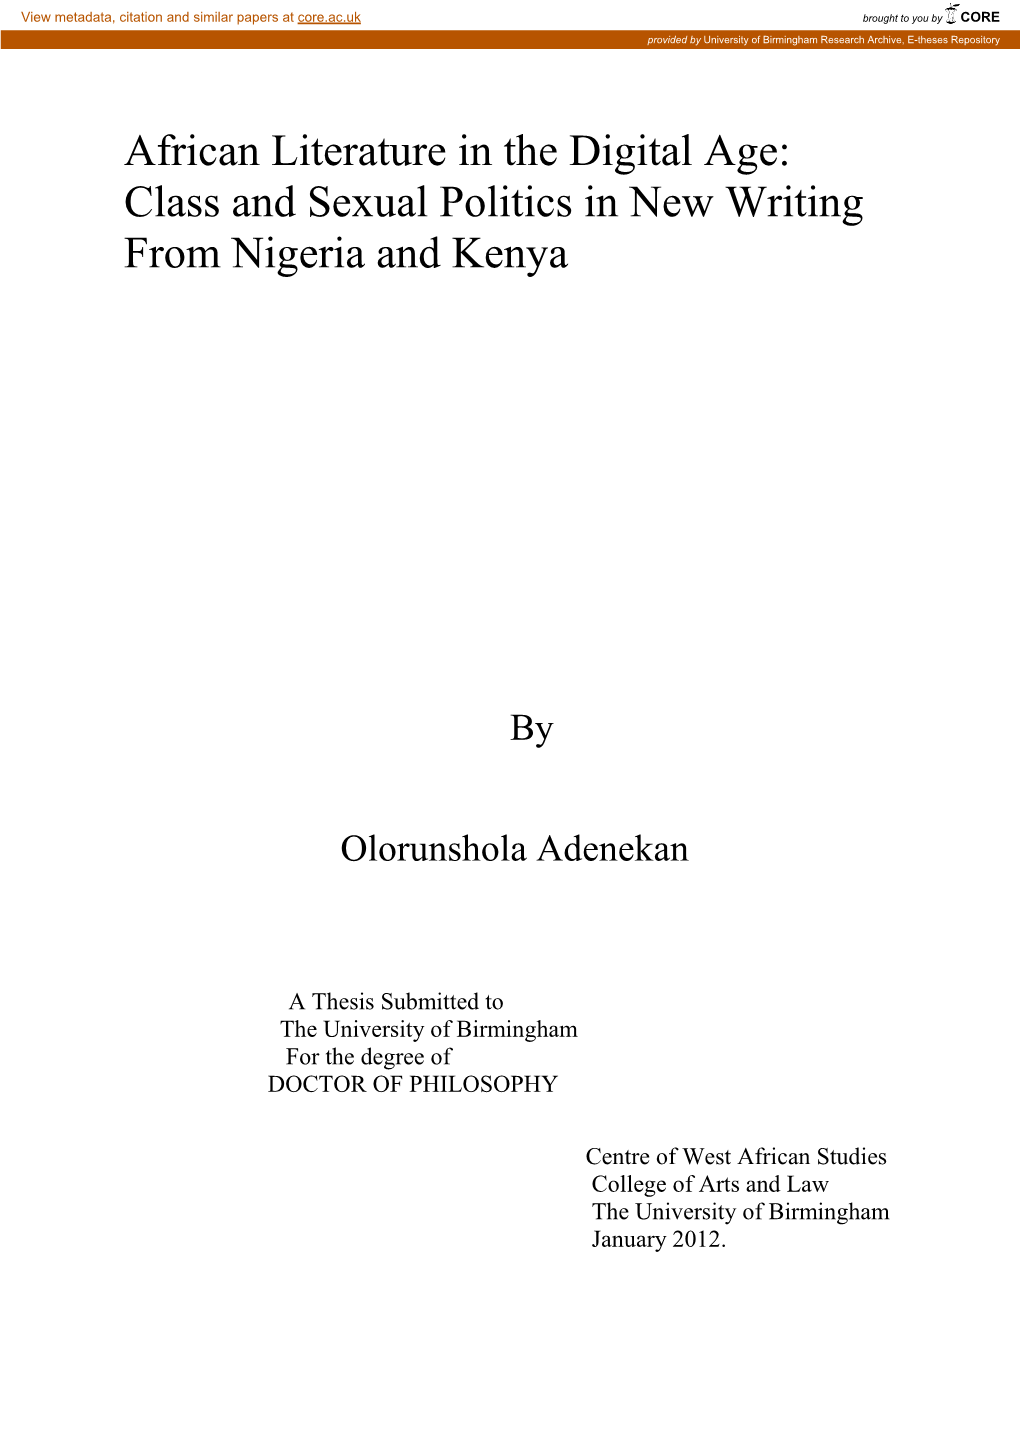 African Literature in the Digital Age: Class and Sexual Politics in New Writing from Nigeria and Kenya